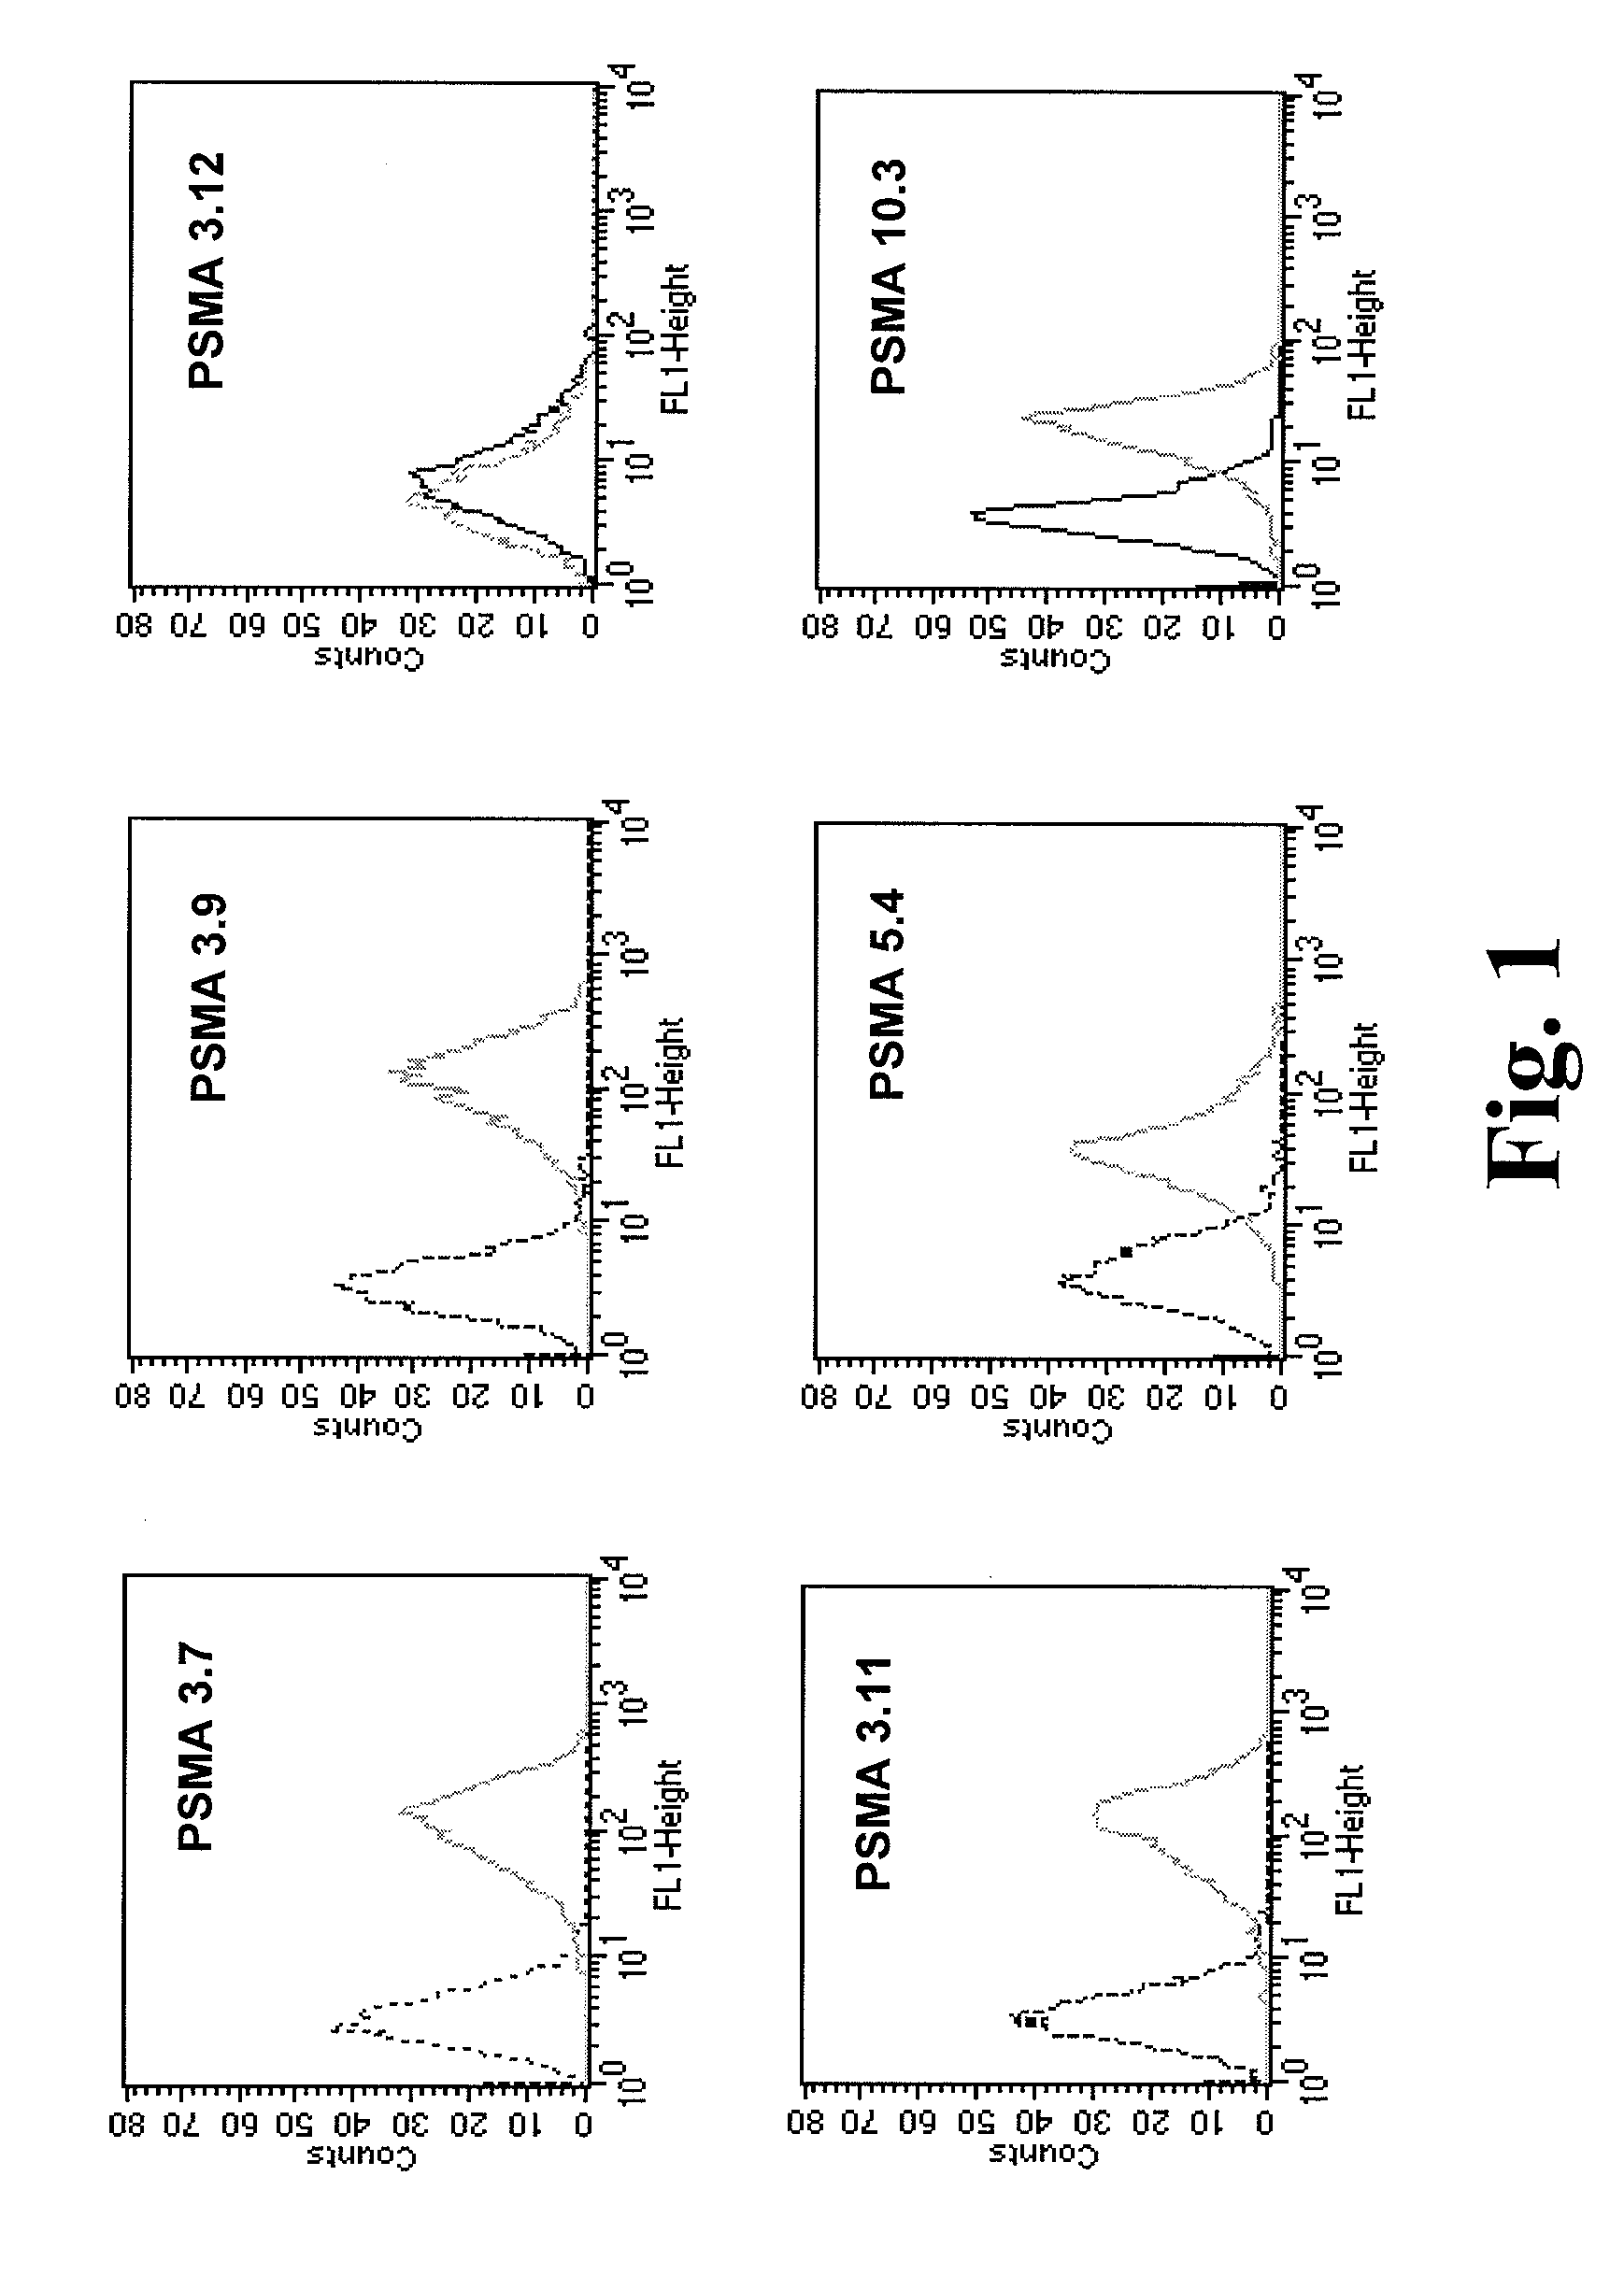 Compositions of PSMA antibodies